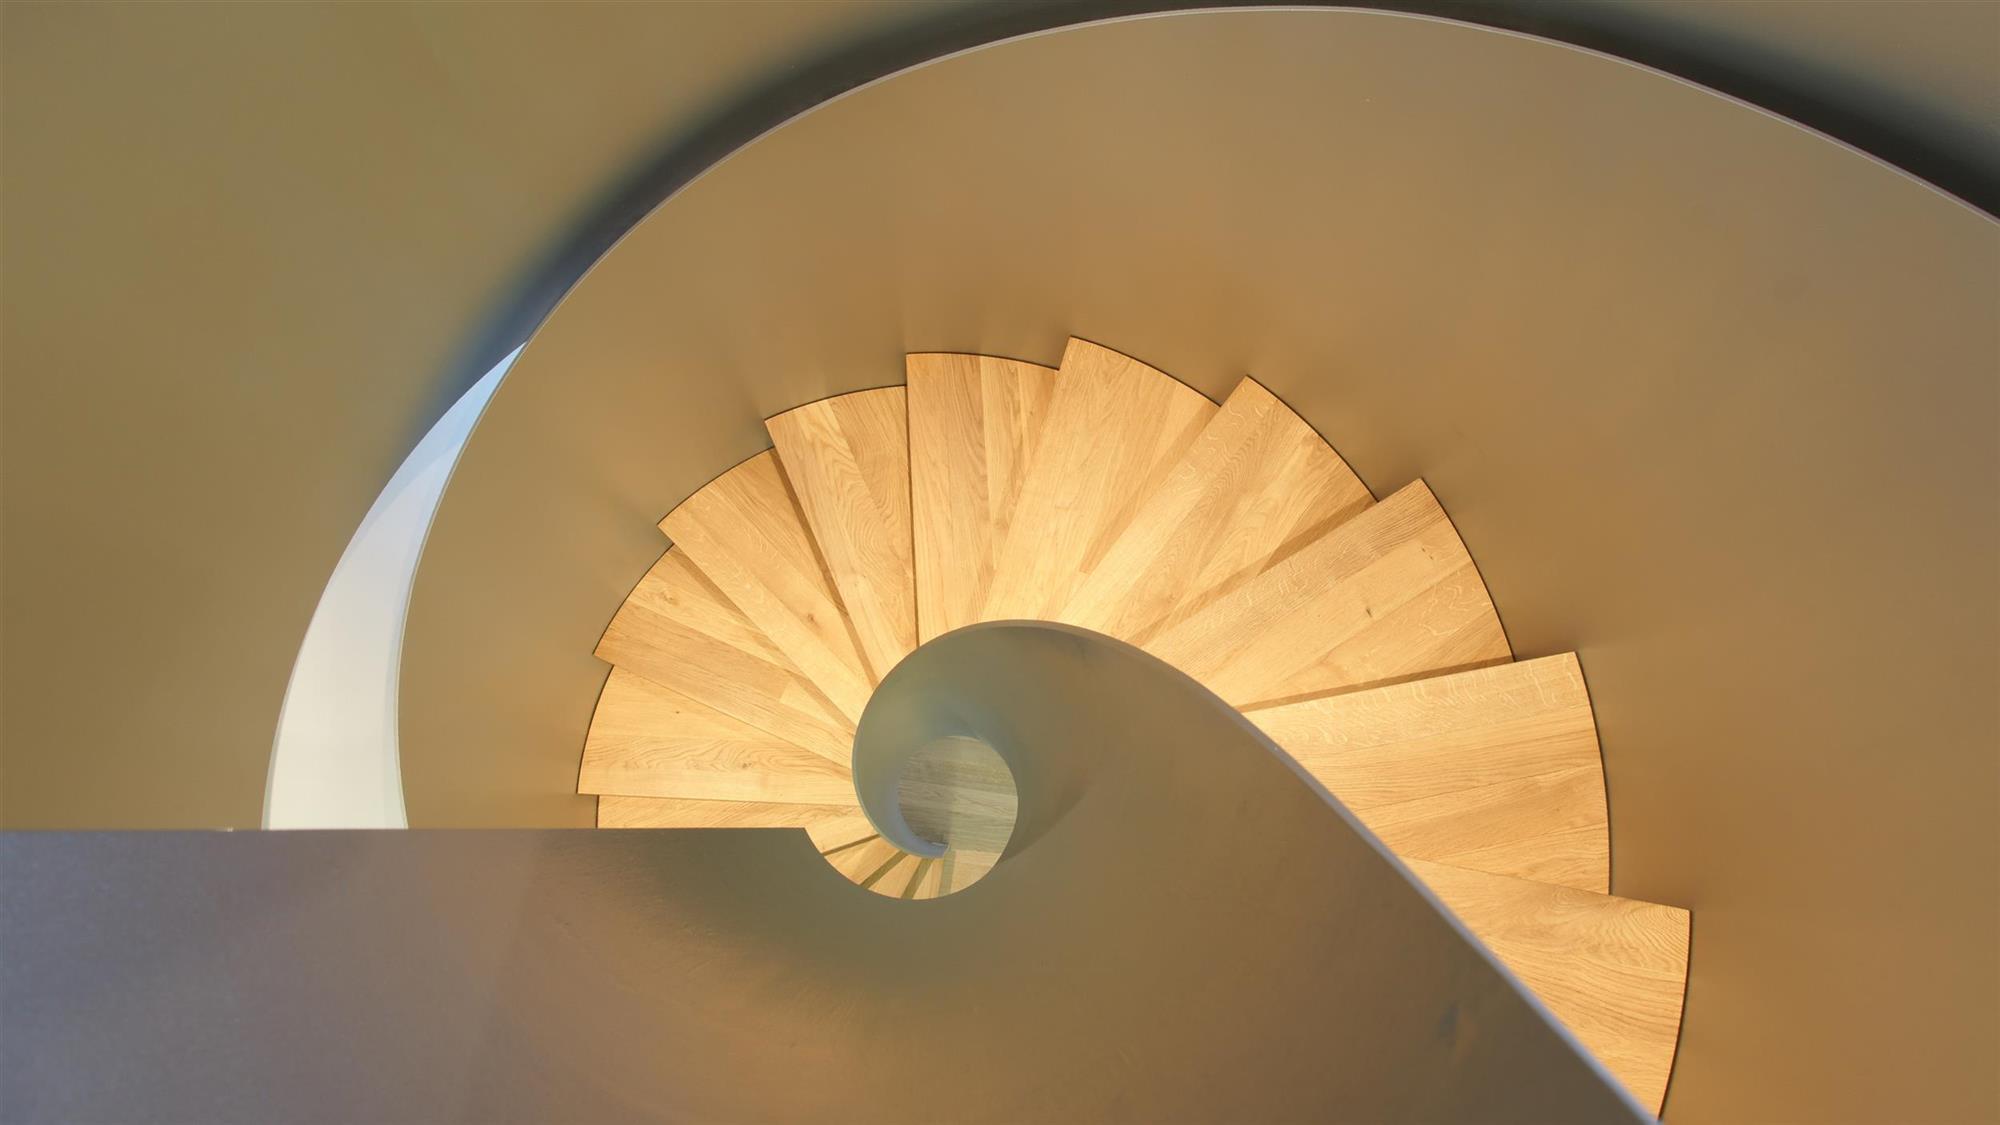 Stairwell of a spiral staircase